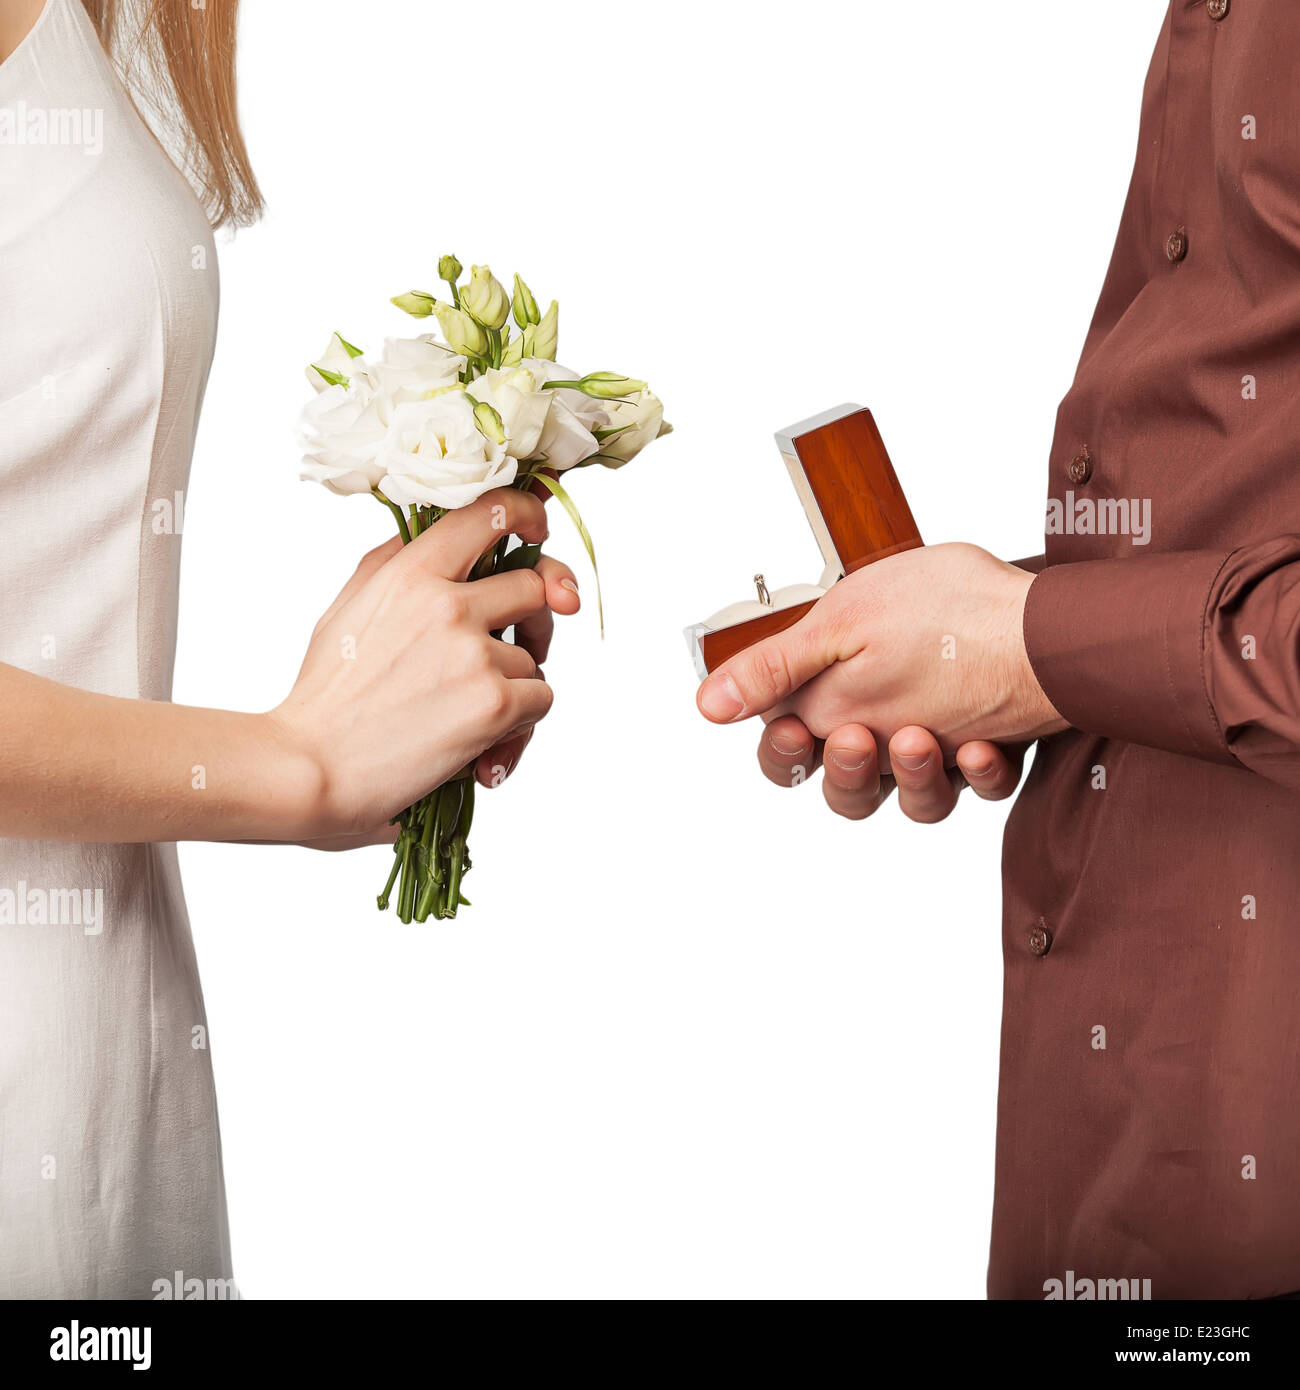 Wedding couple holding ring box and a bouquet of flowers Stock Photo